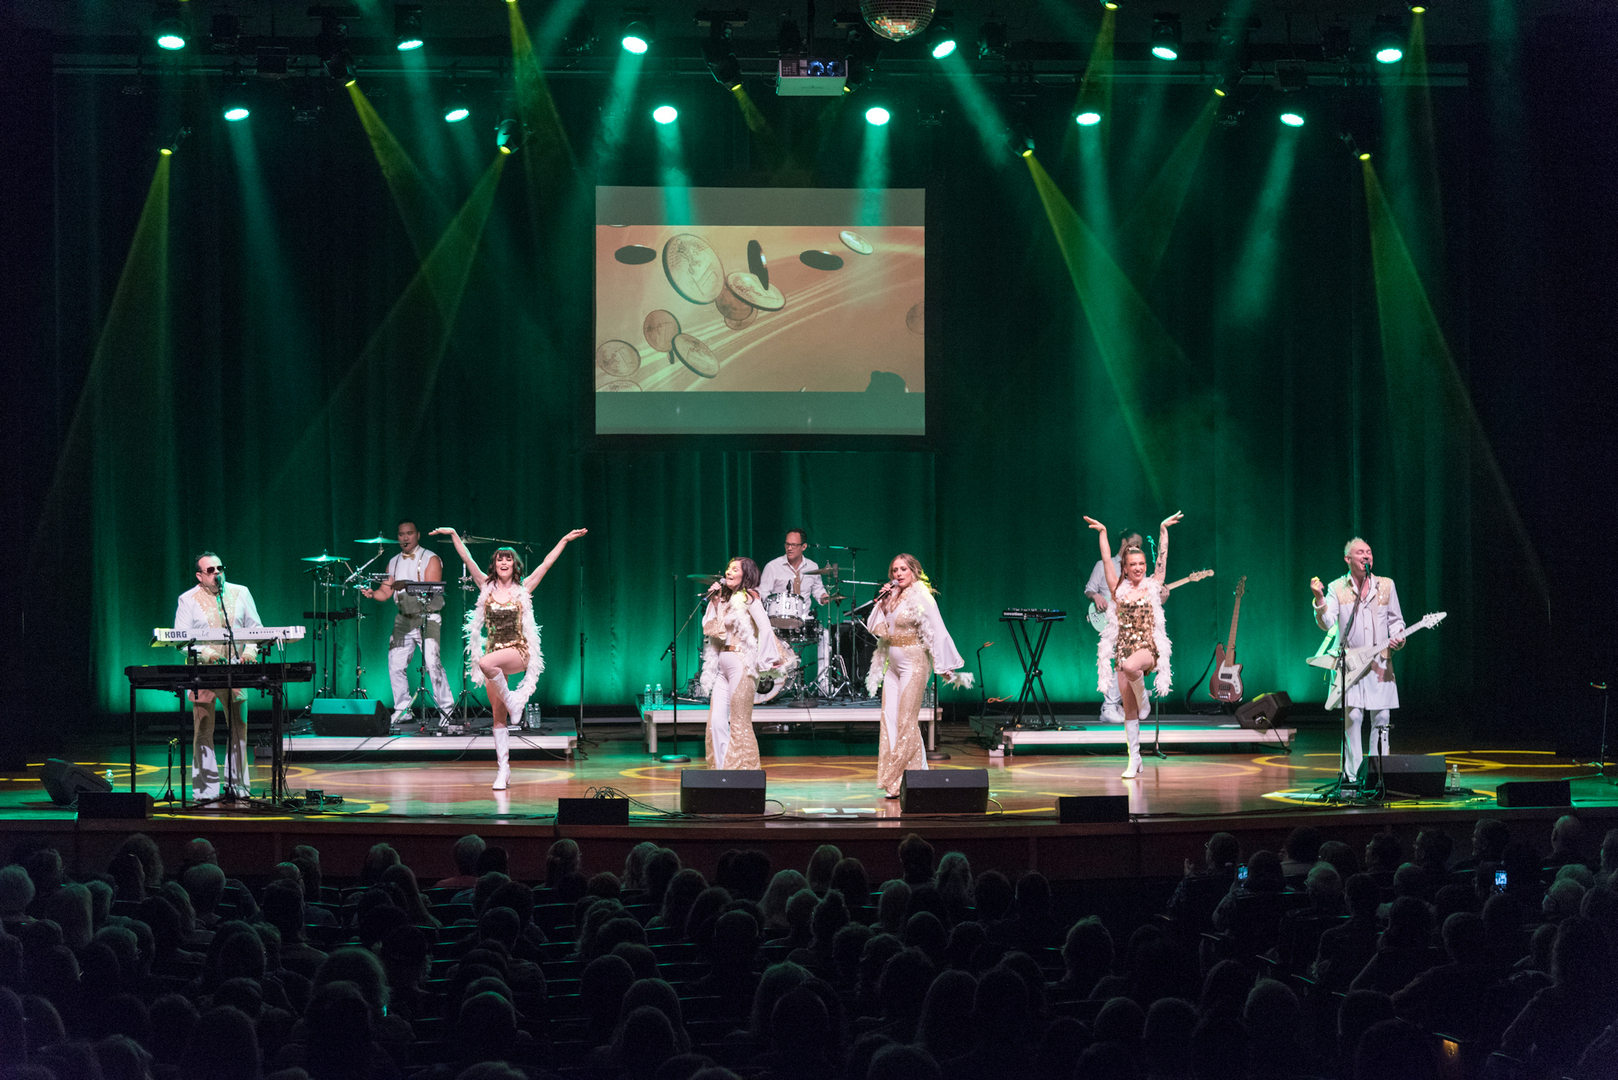 The Music of ABBA with ABRA Cadabra returns to the Red Deer Memorial on Sept 8th, Red Deer, Alberta, Canada